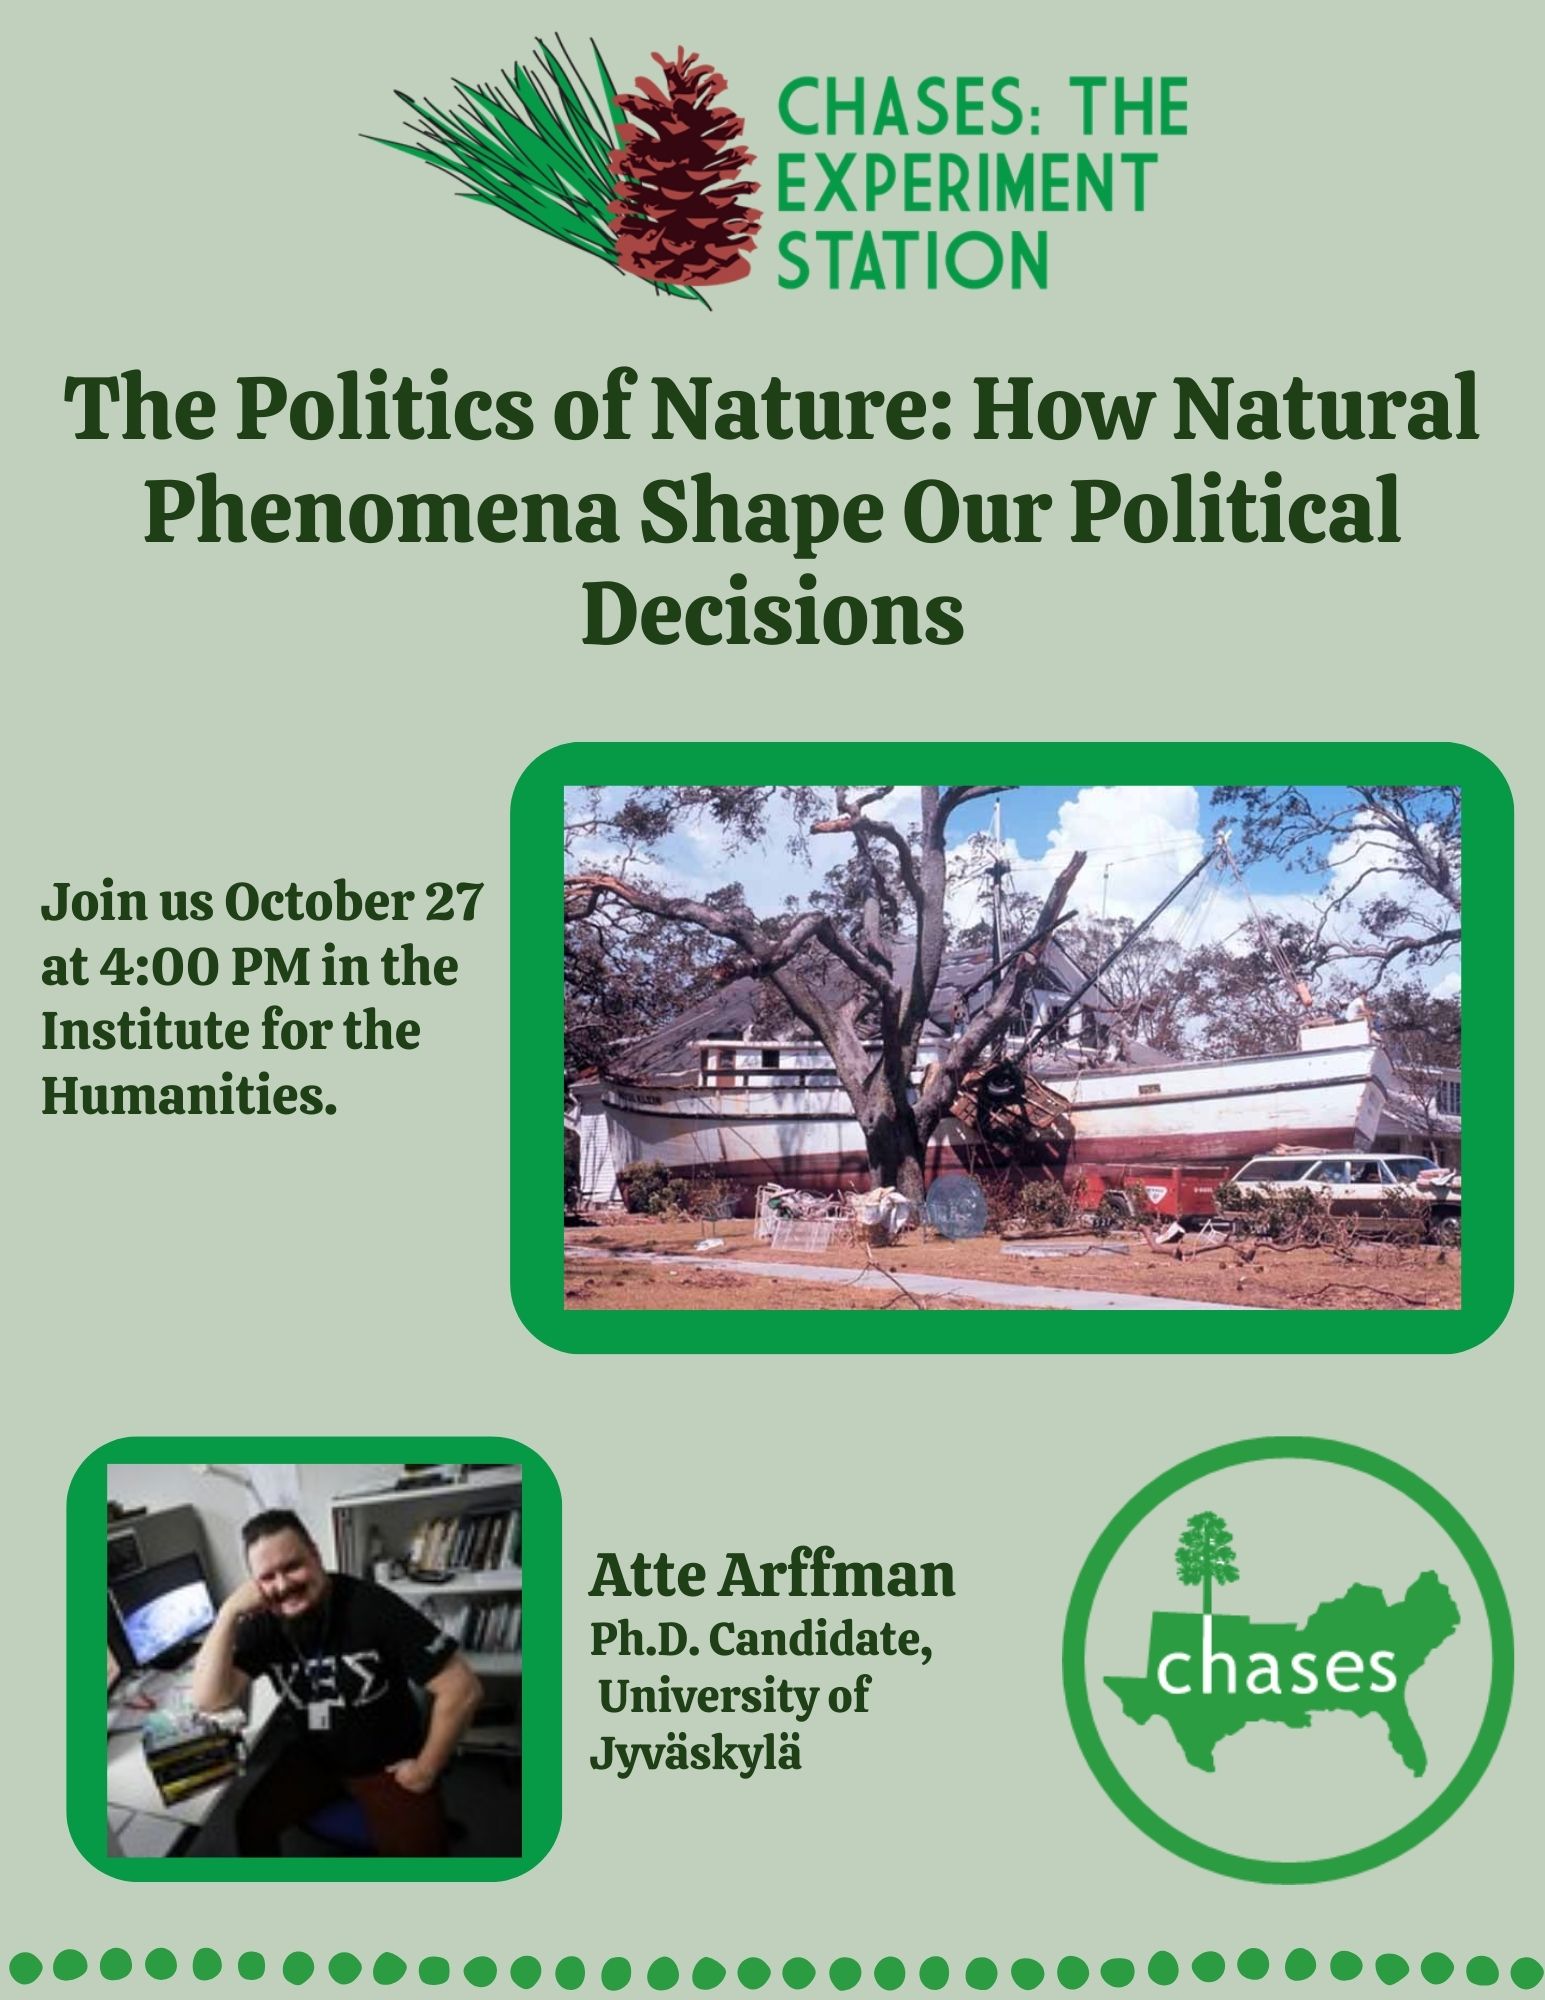 Chases Presents The Politics of Nature: How Natural Phenomena Shape Our Political Decisions By Atte Arffman